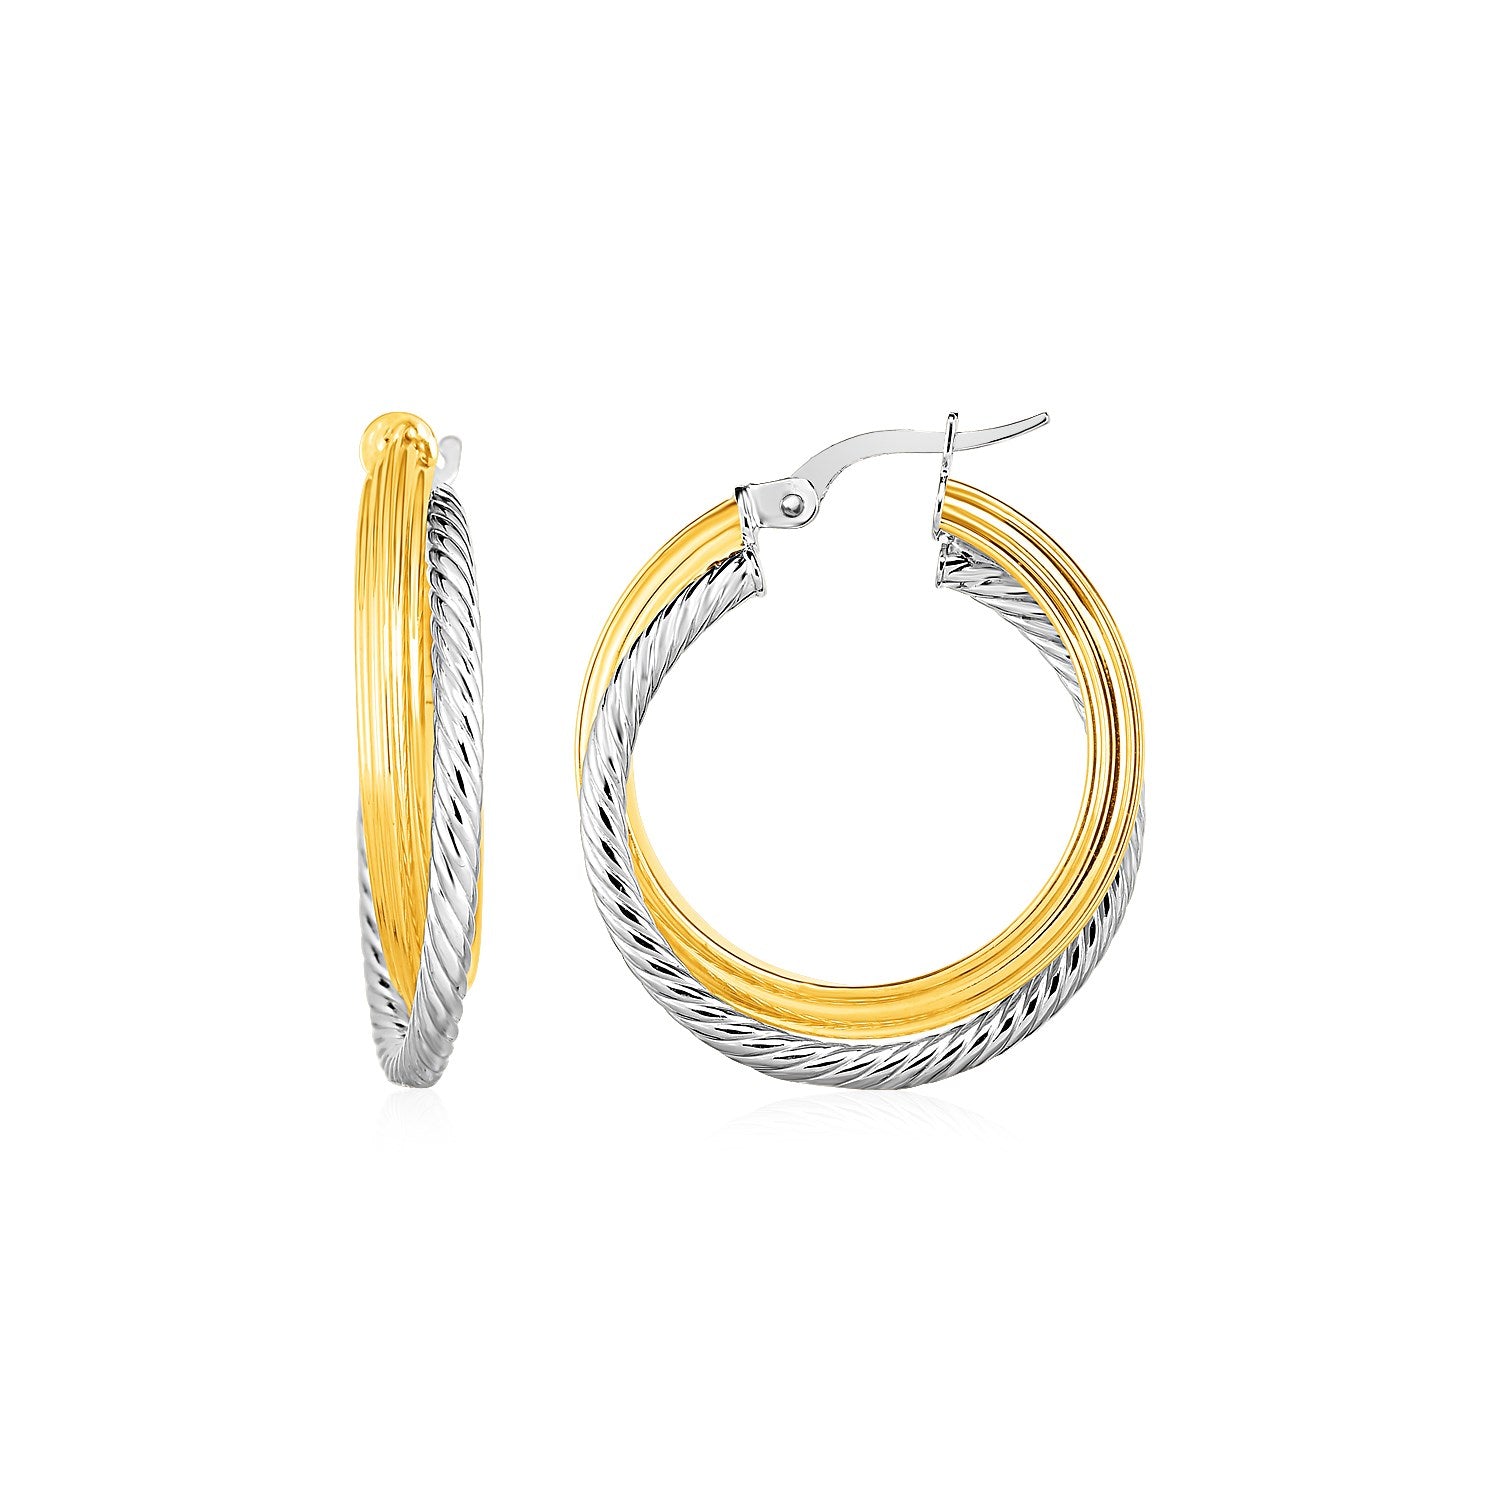 Two Part Textured And Shiny Hoop Earrings In 14K Yellow And White Gold 55983-1